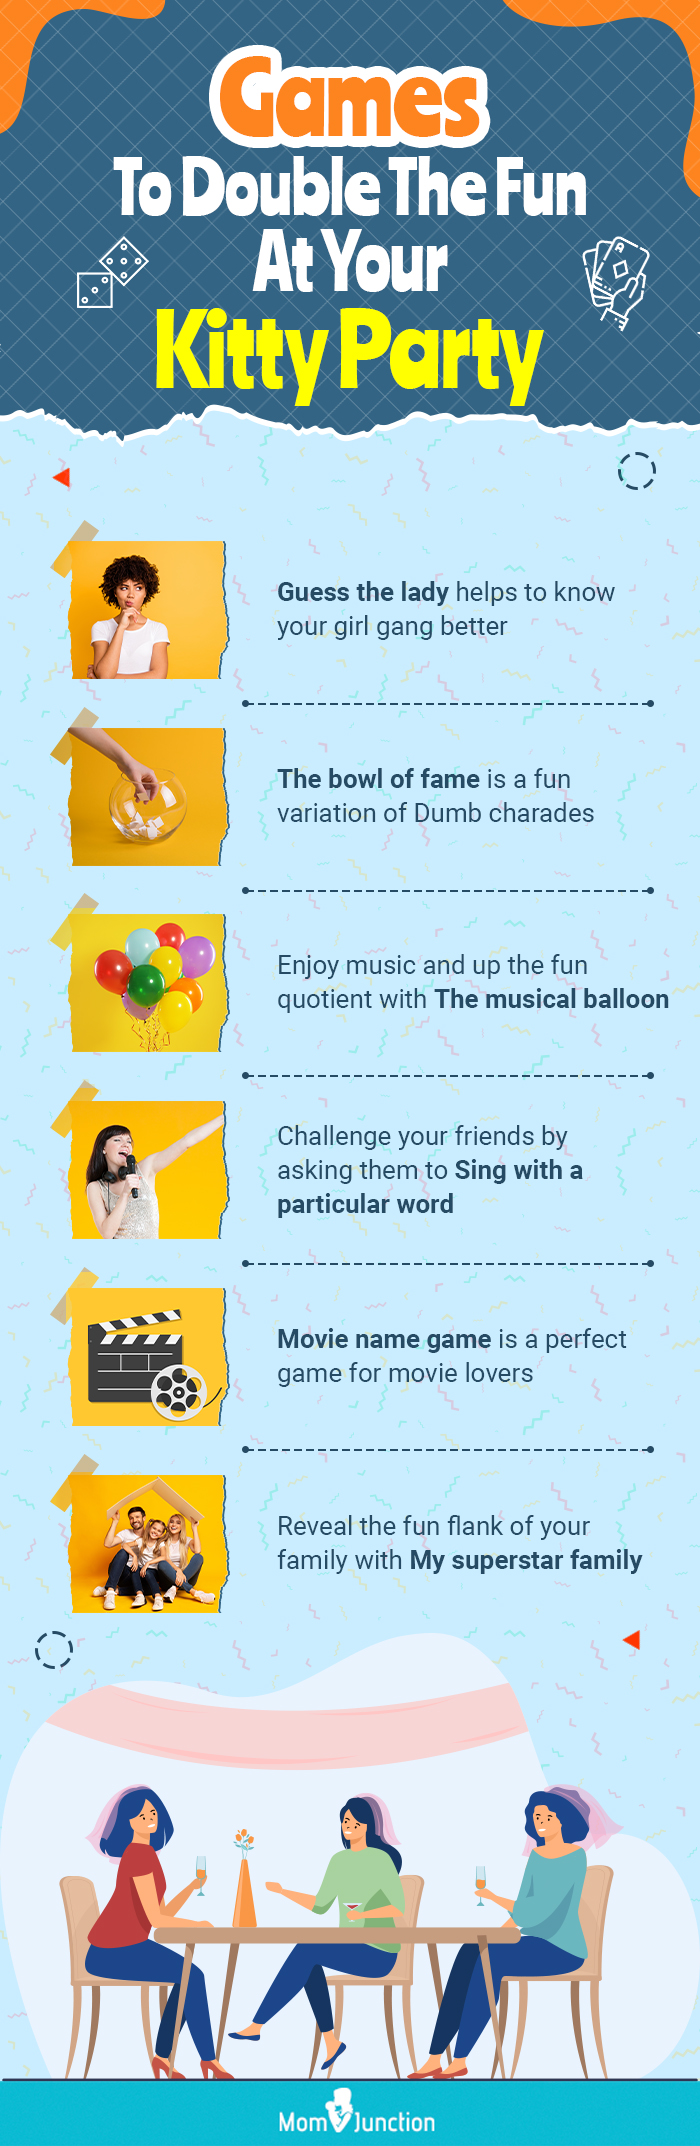 games to double the fun at your kitty party [infographic]